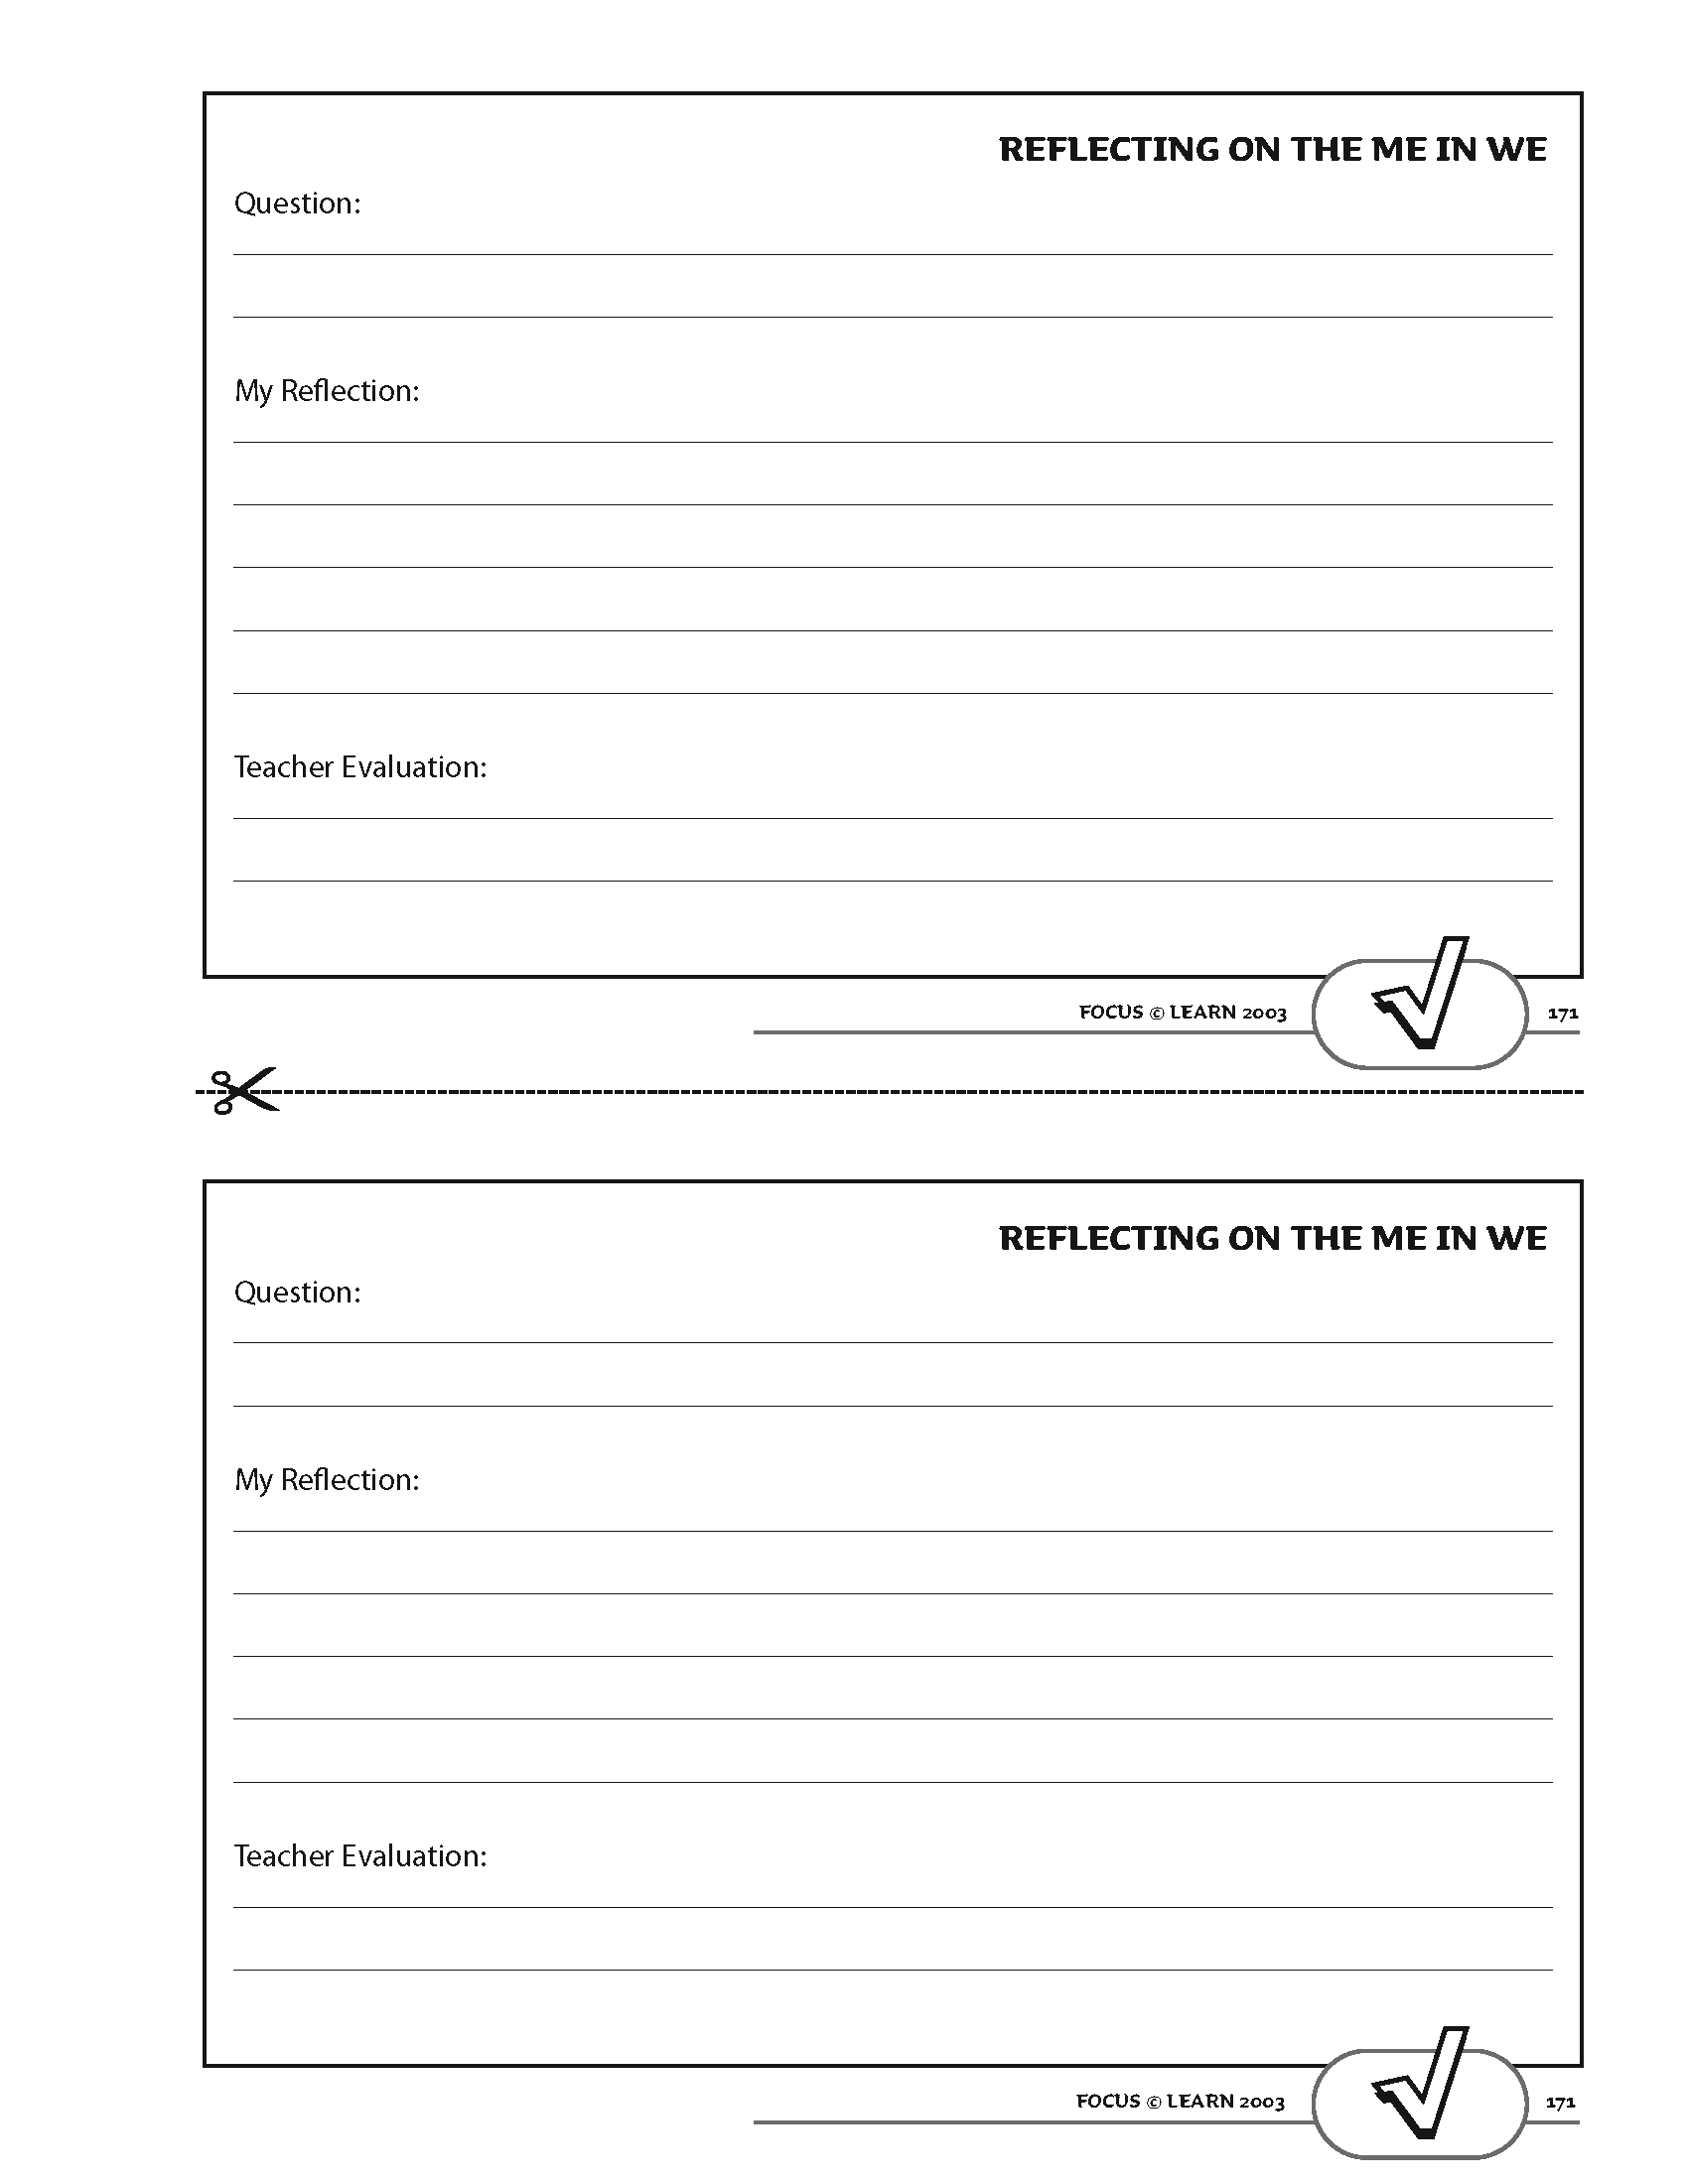 Reflect on the Me in We Tool: Self-Evaluation Tool for Group Work